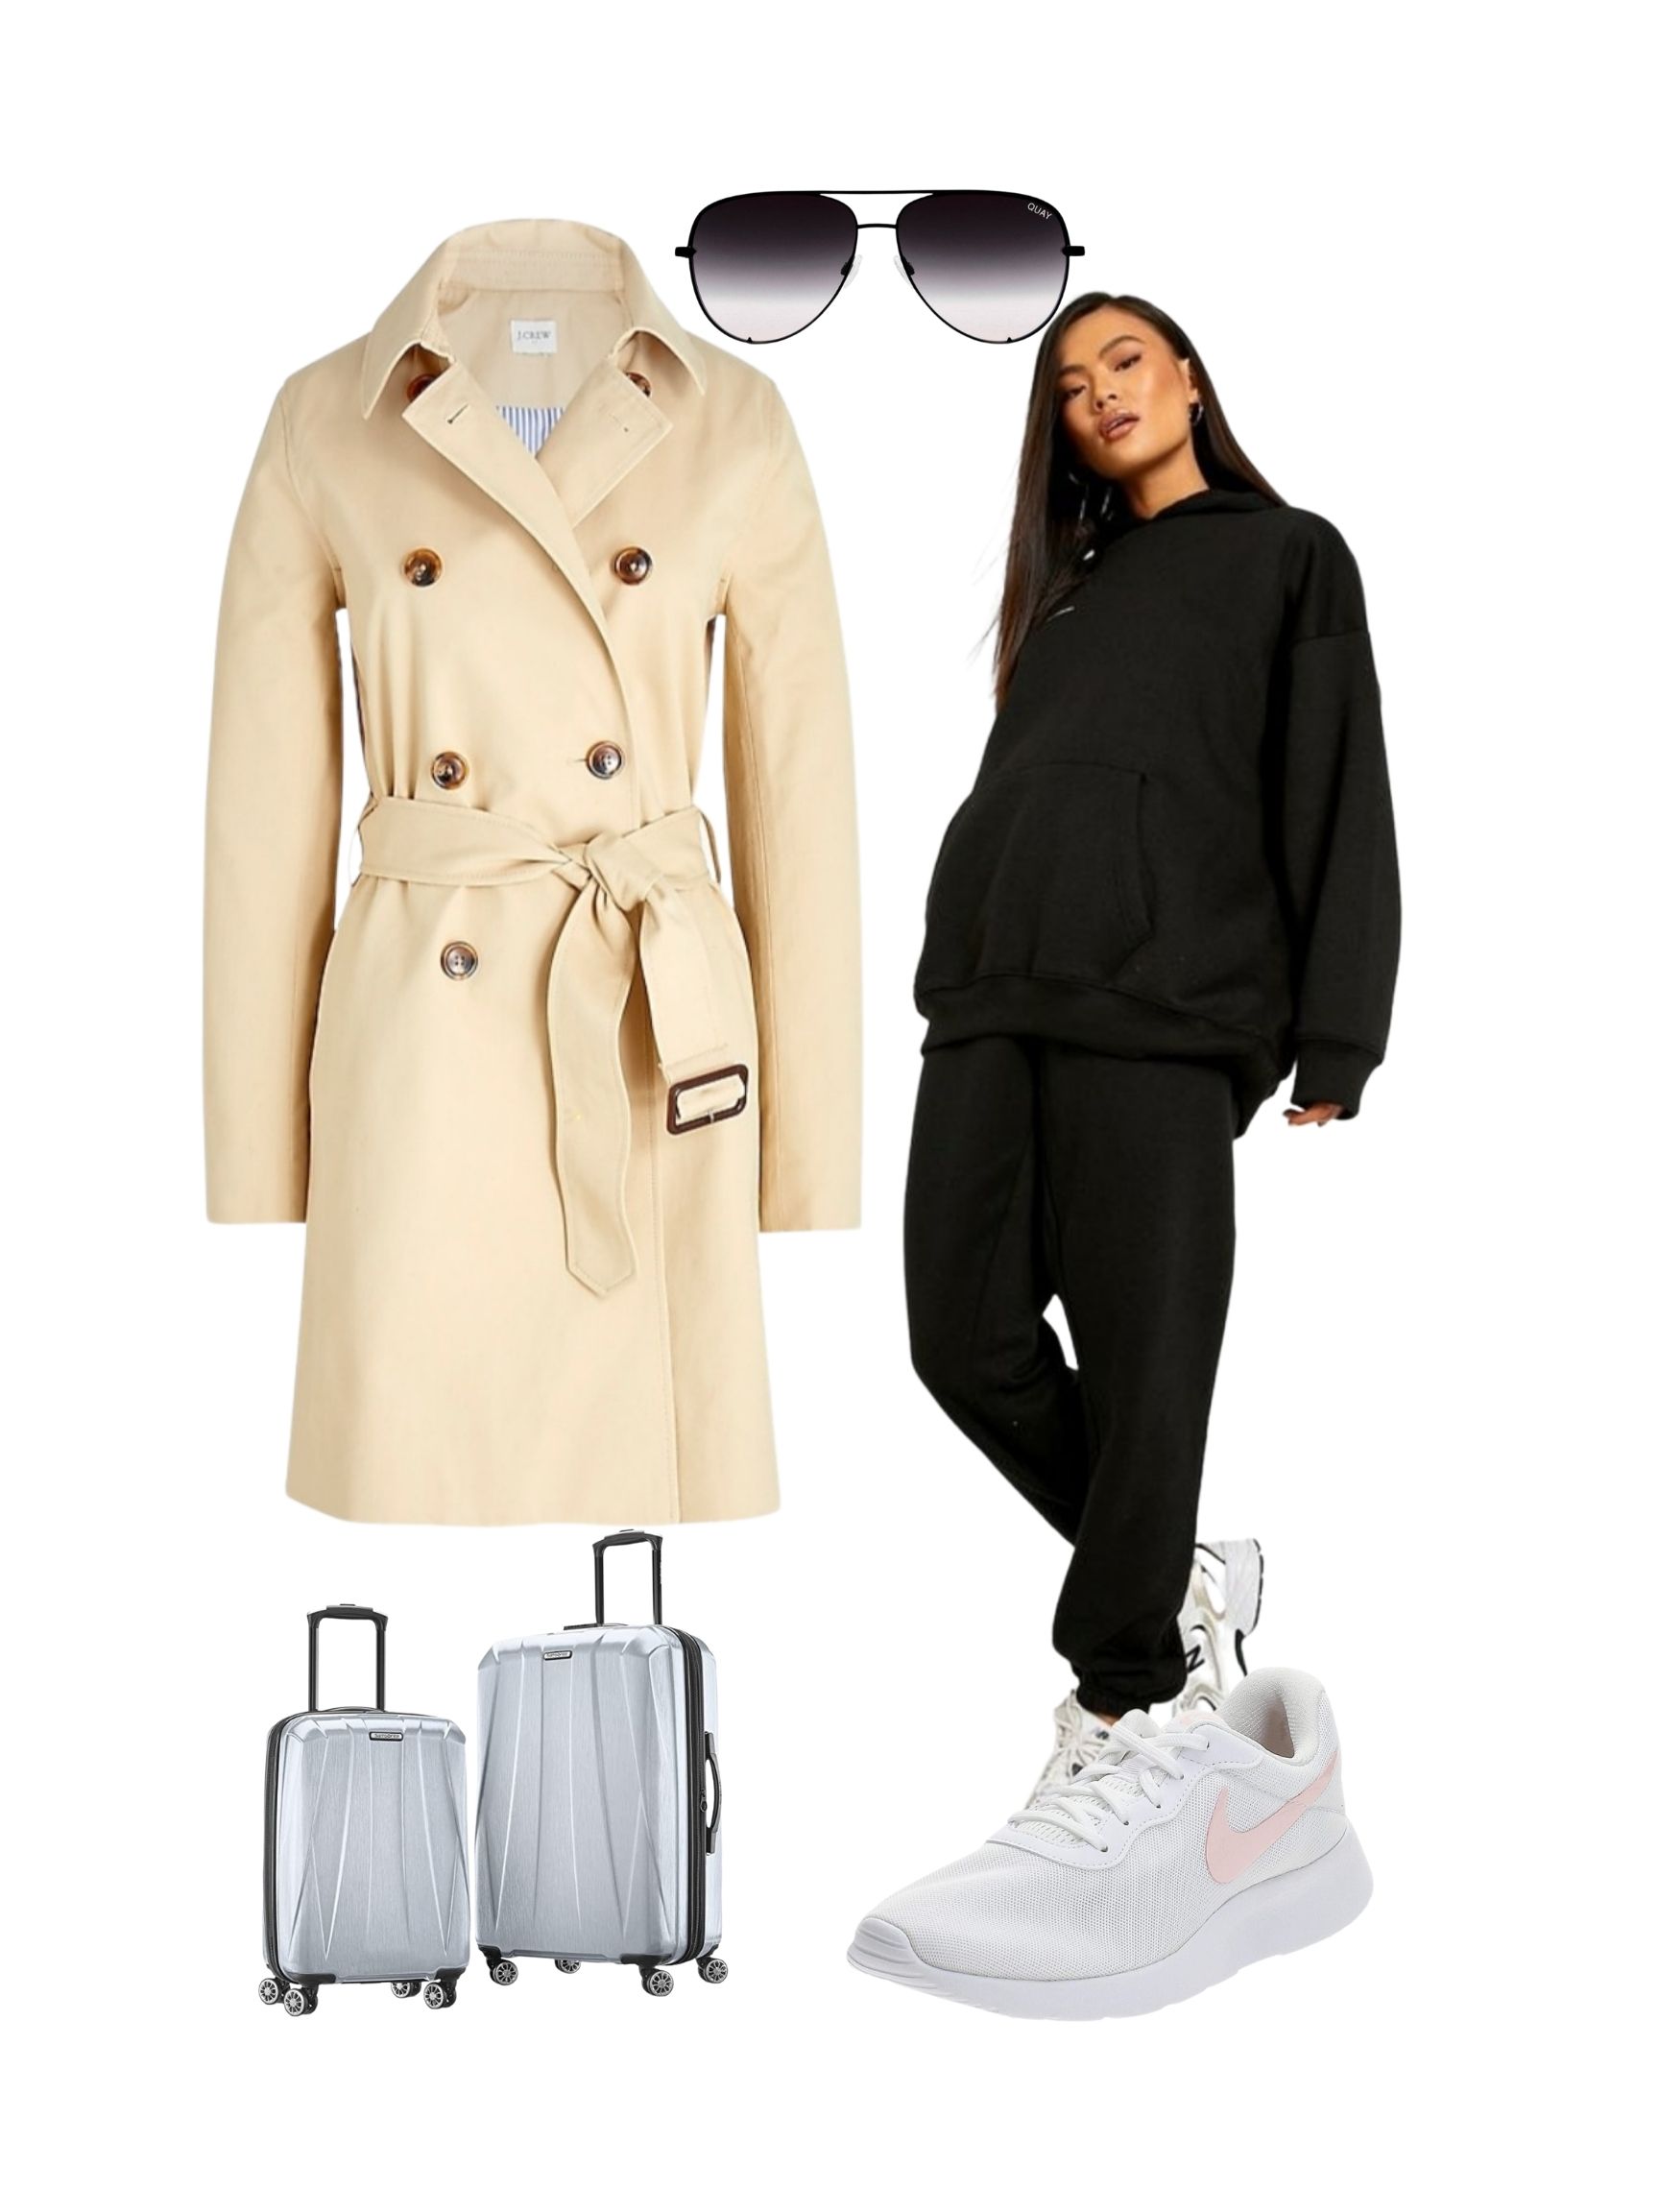 MARCH 2, 2015 A TRANSITIONAL TRENCH W/ THE CLASSICS - Similar